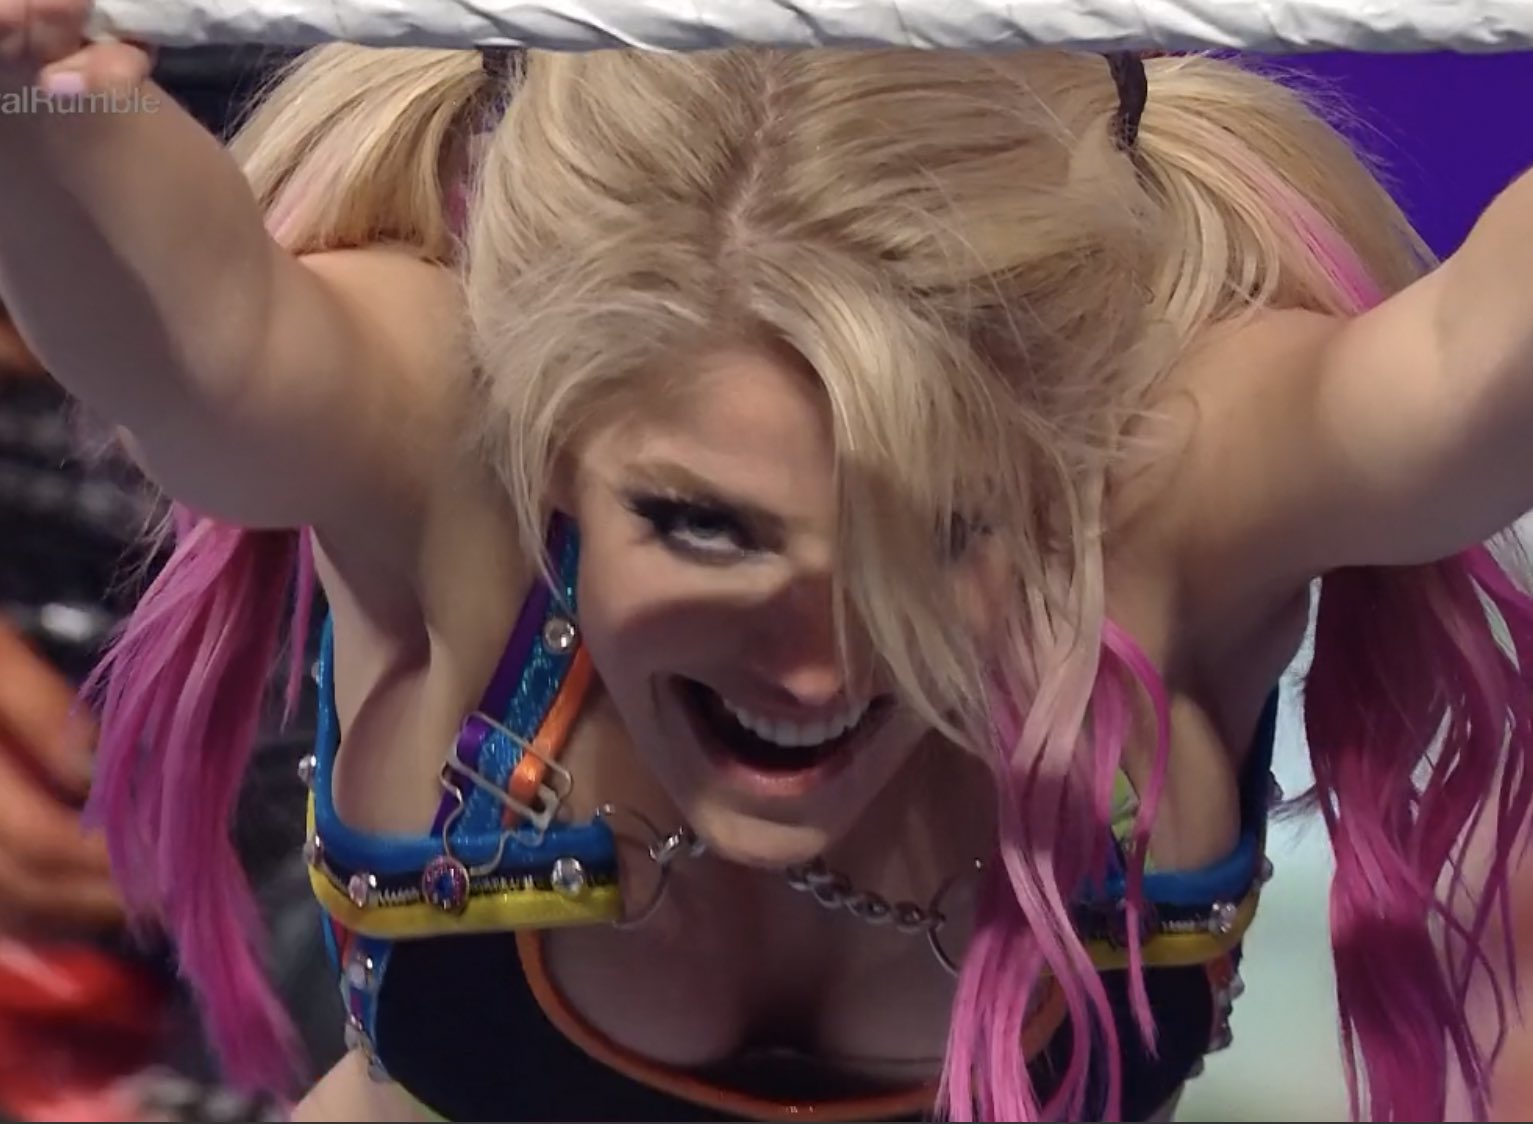 david c weaver recommends wwe alexa bliss boobs pic